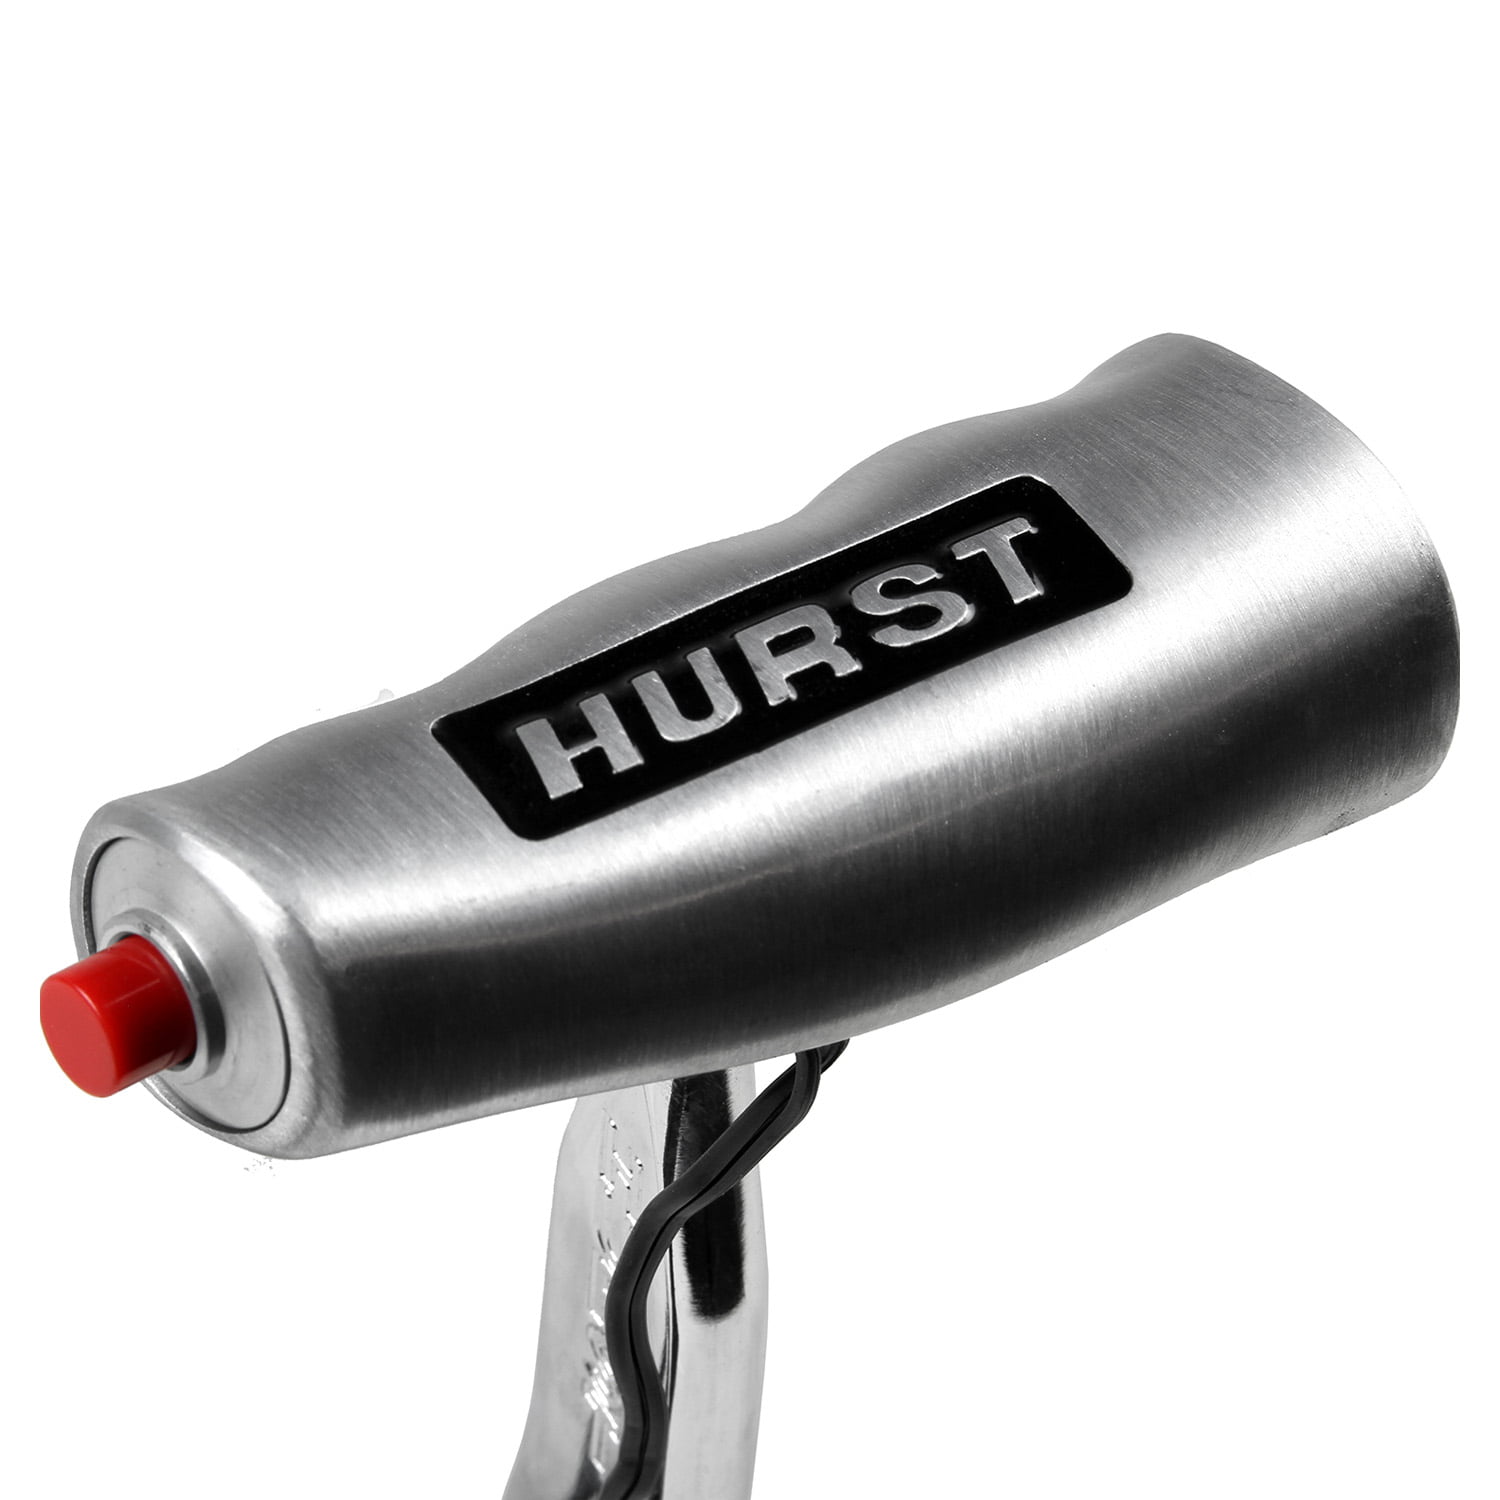 Shift Knob, T-Handle With Button, 7/16-20 TH., Aluminum, Brushed, Hurst  Logo, Universal, Automatic / Manual Transmission.